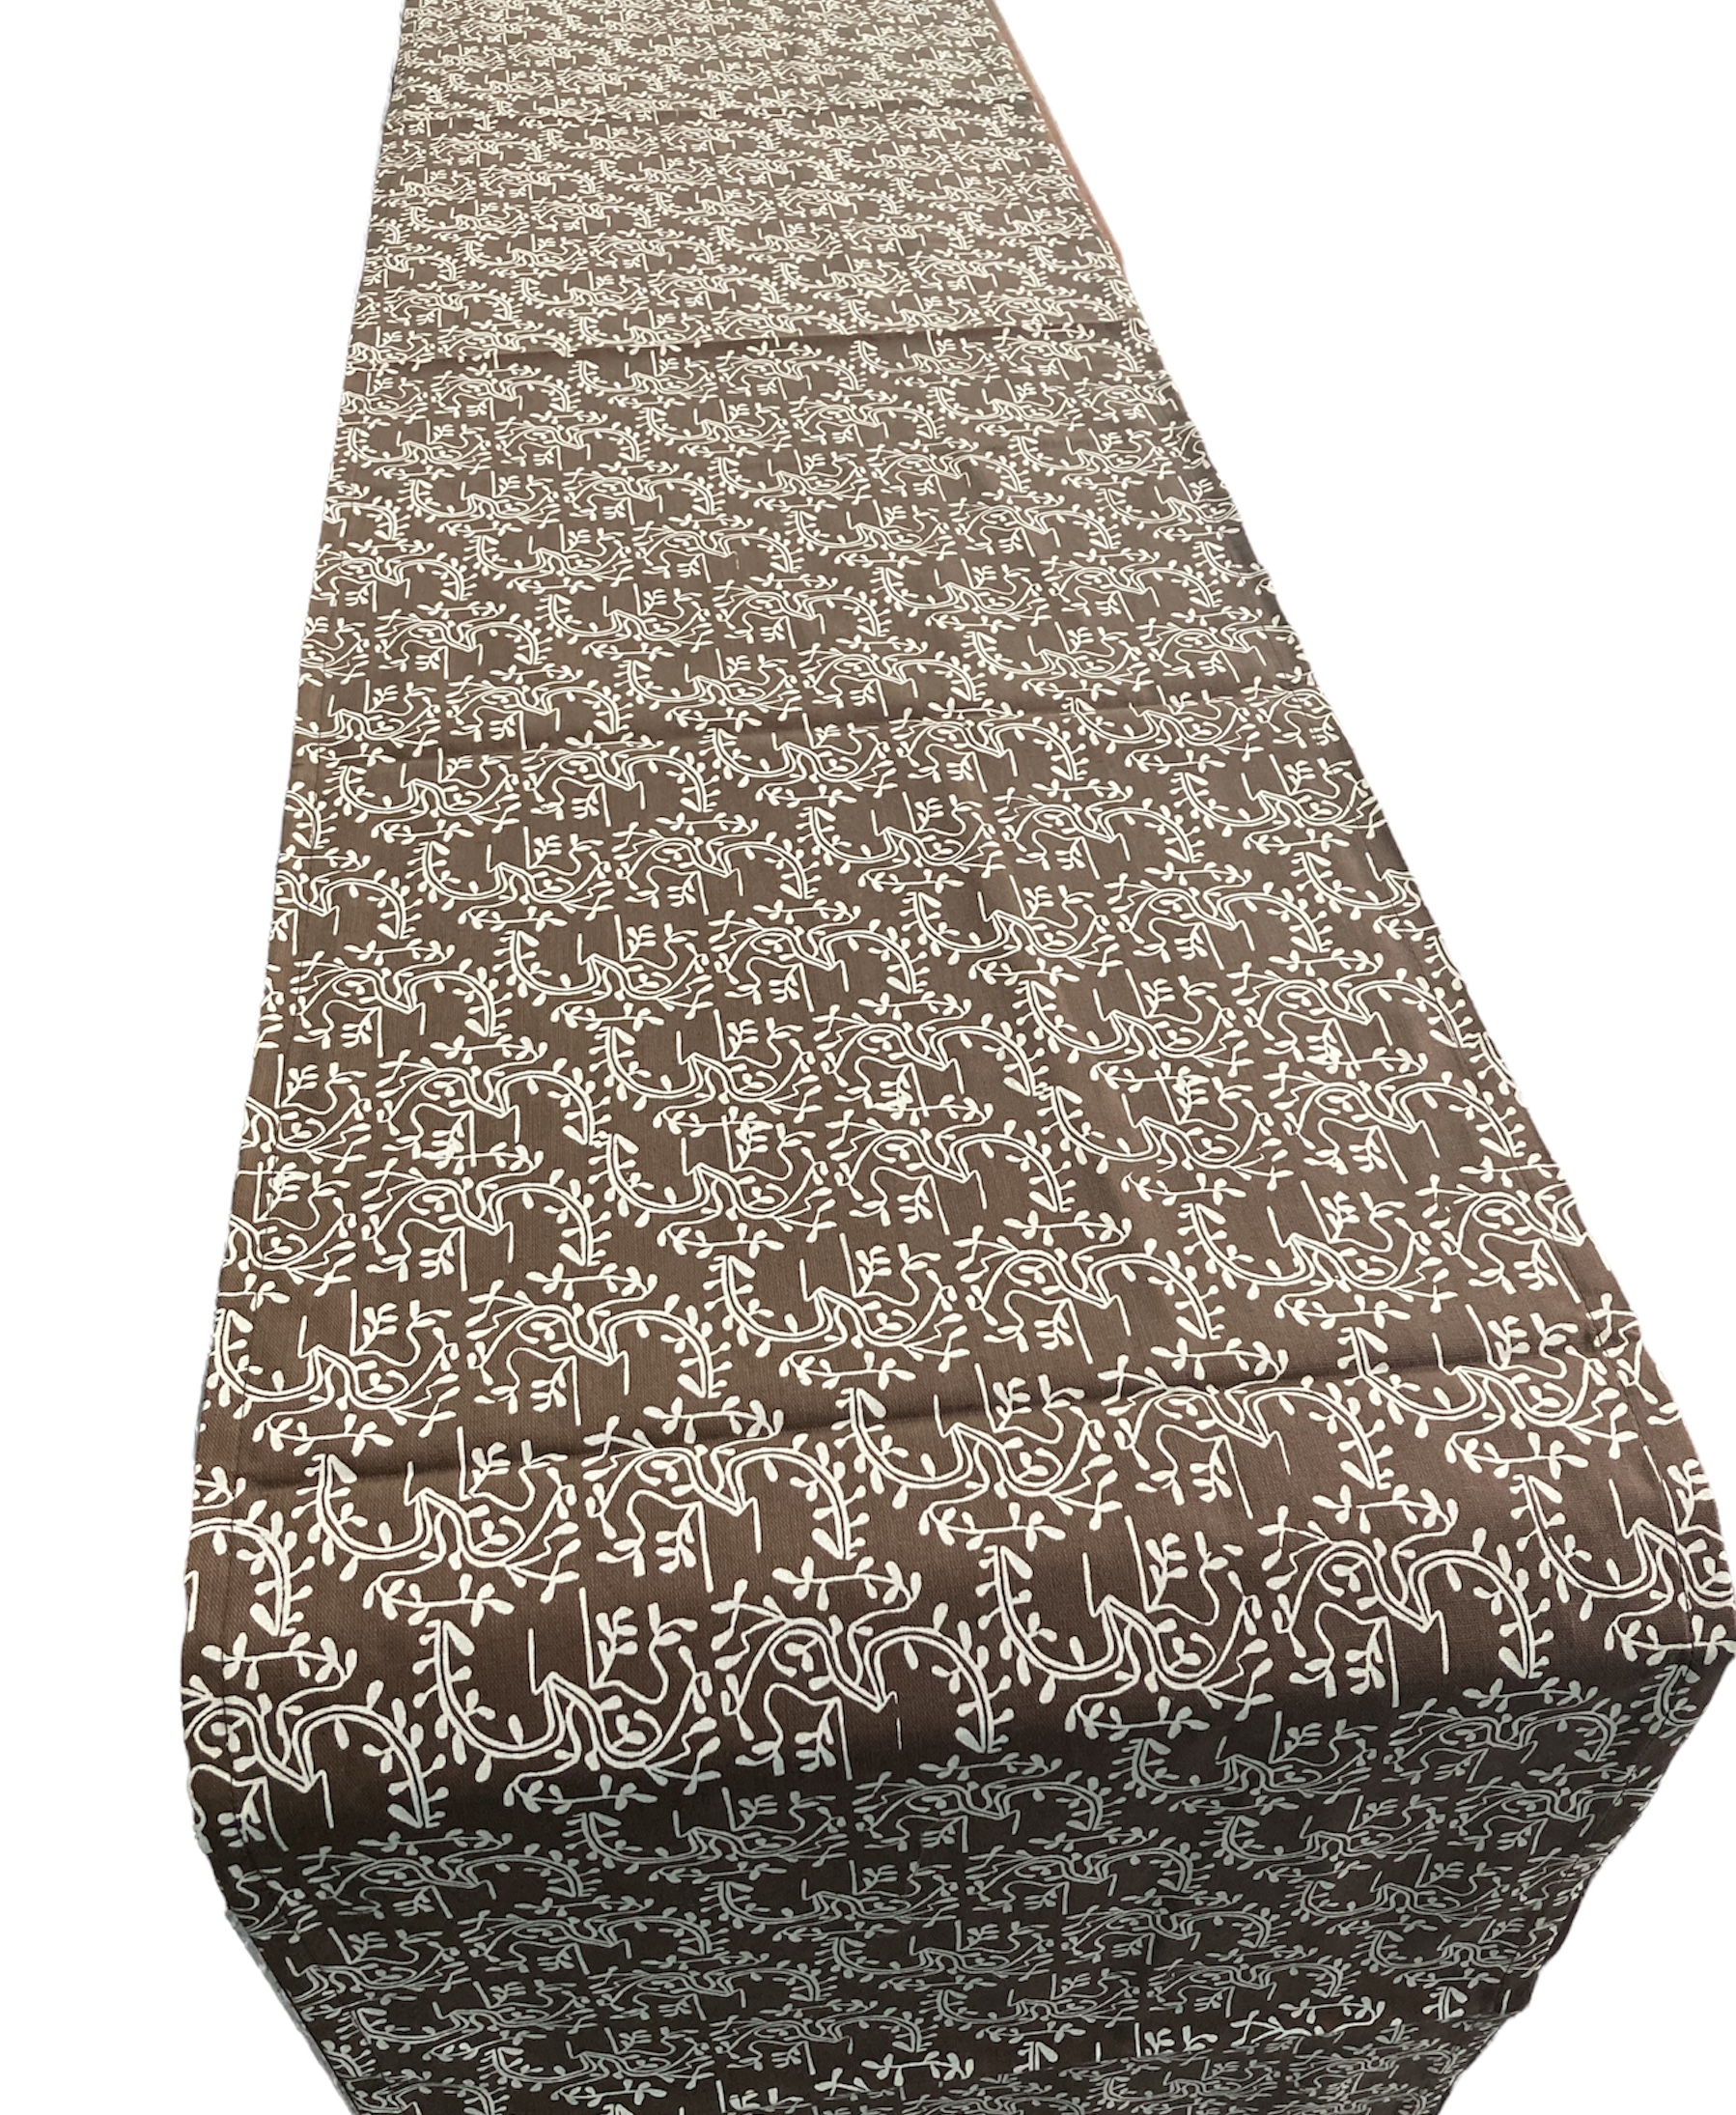 100% cotton Table Runner 96" x 16" from Namibia - Design 22l